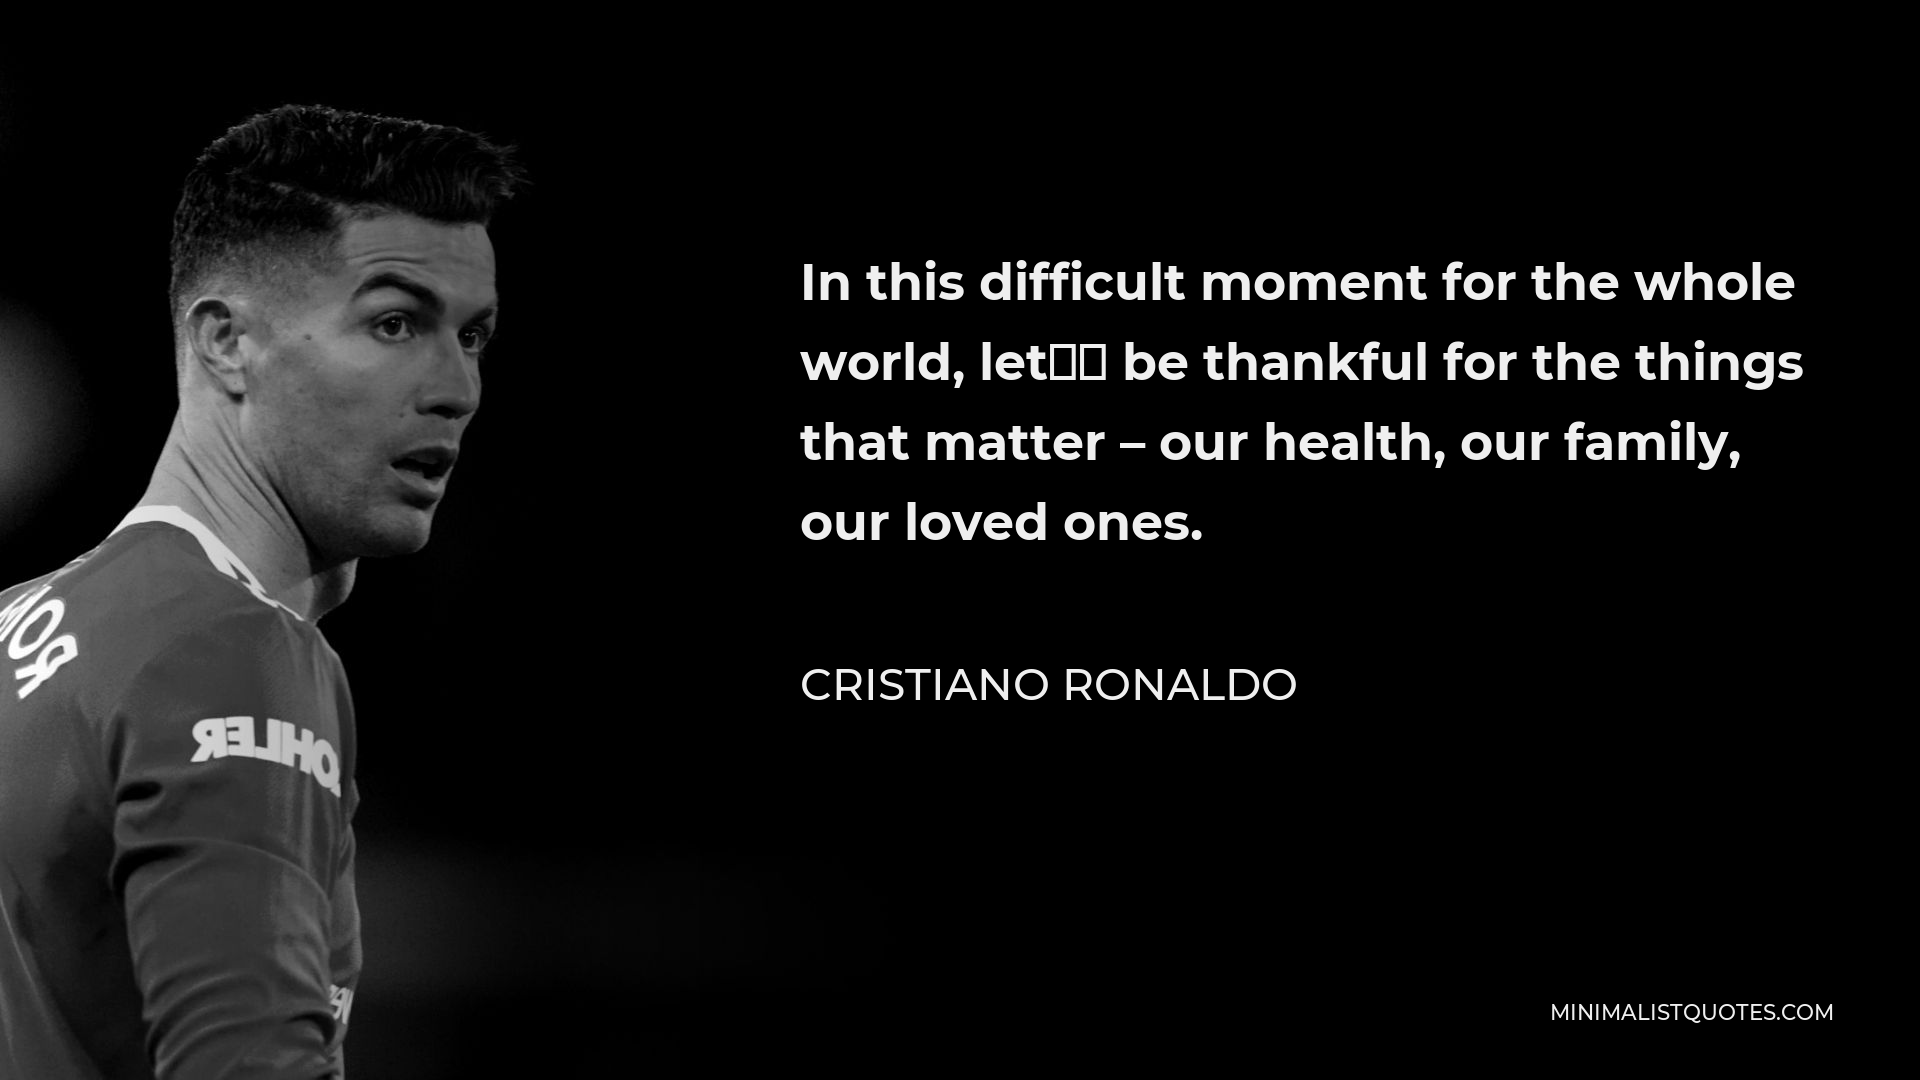 Cristiano Ronaldo Quote - In this difficult moment for the whole world, let’s be thankful for the things that matter – our health, our family, our loved ones.